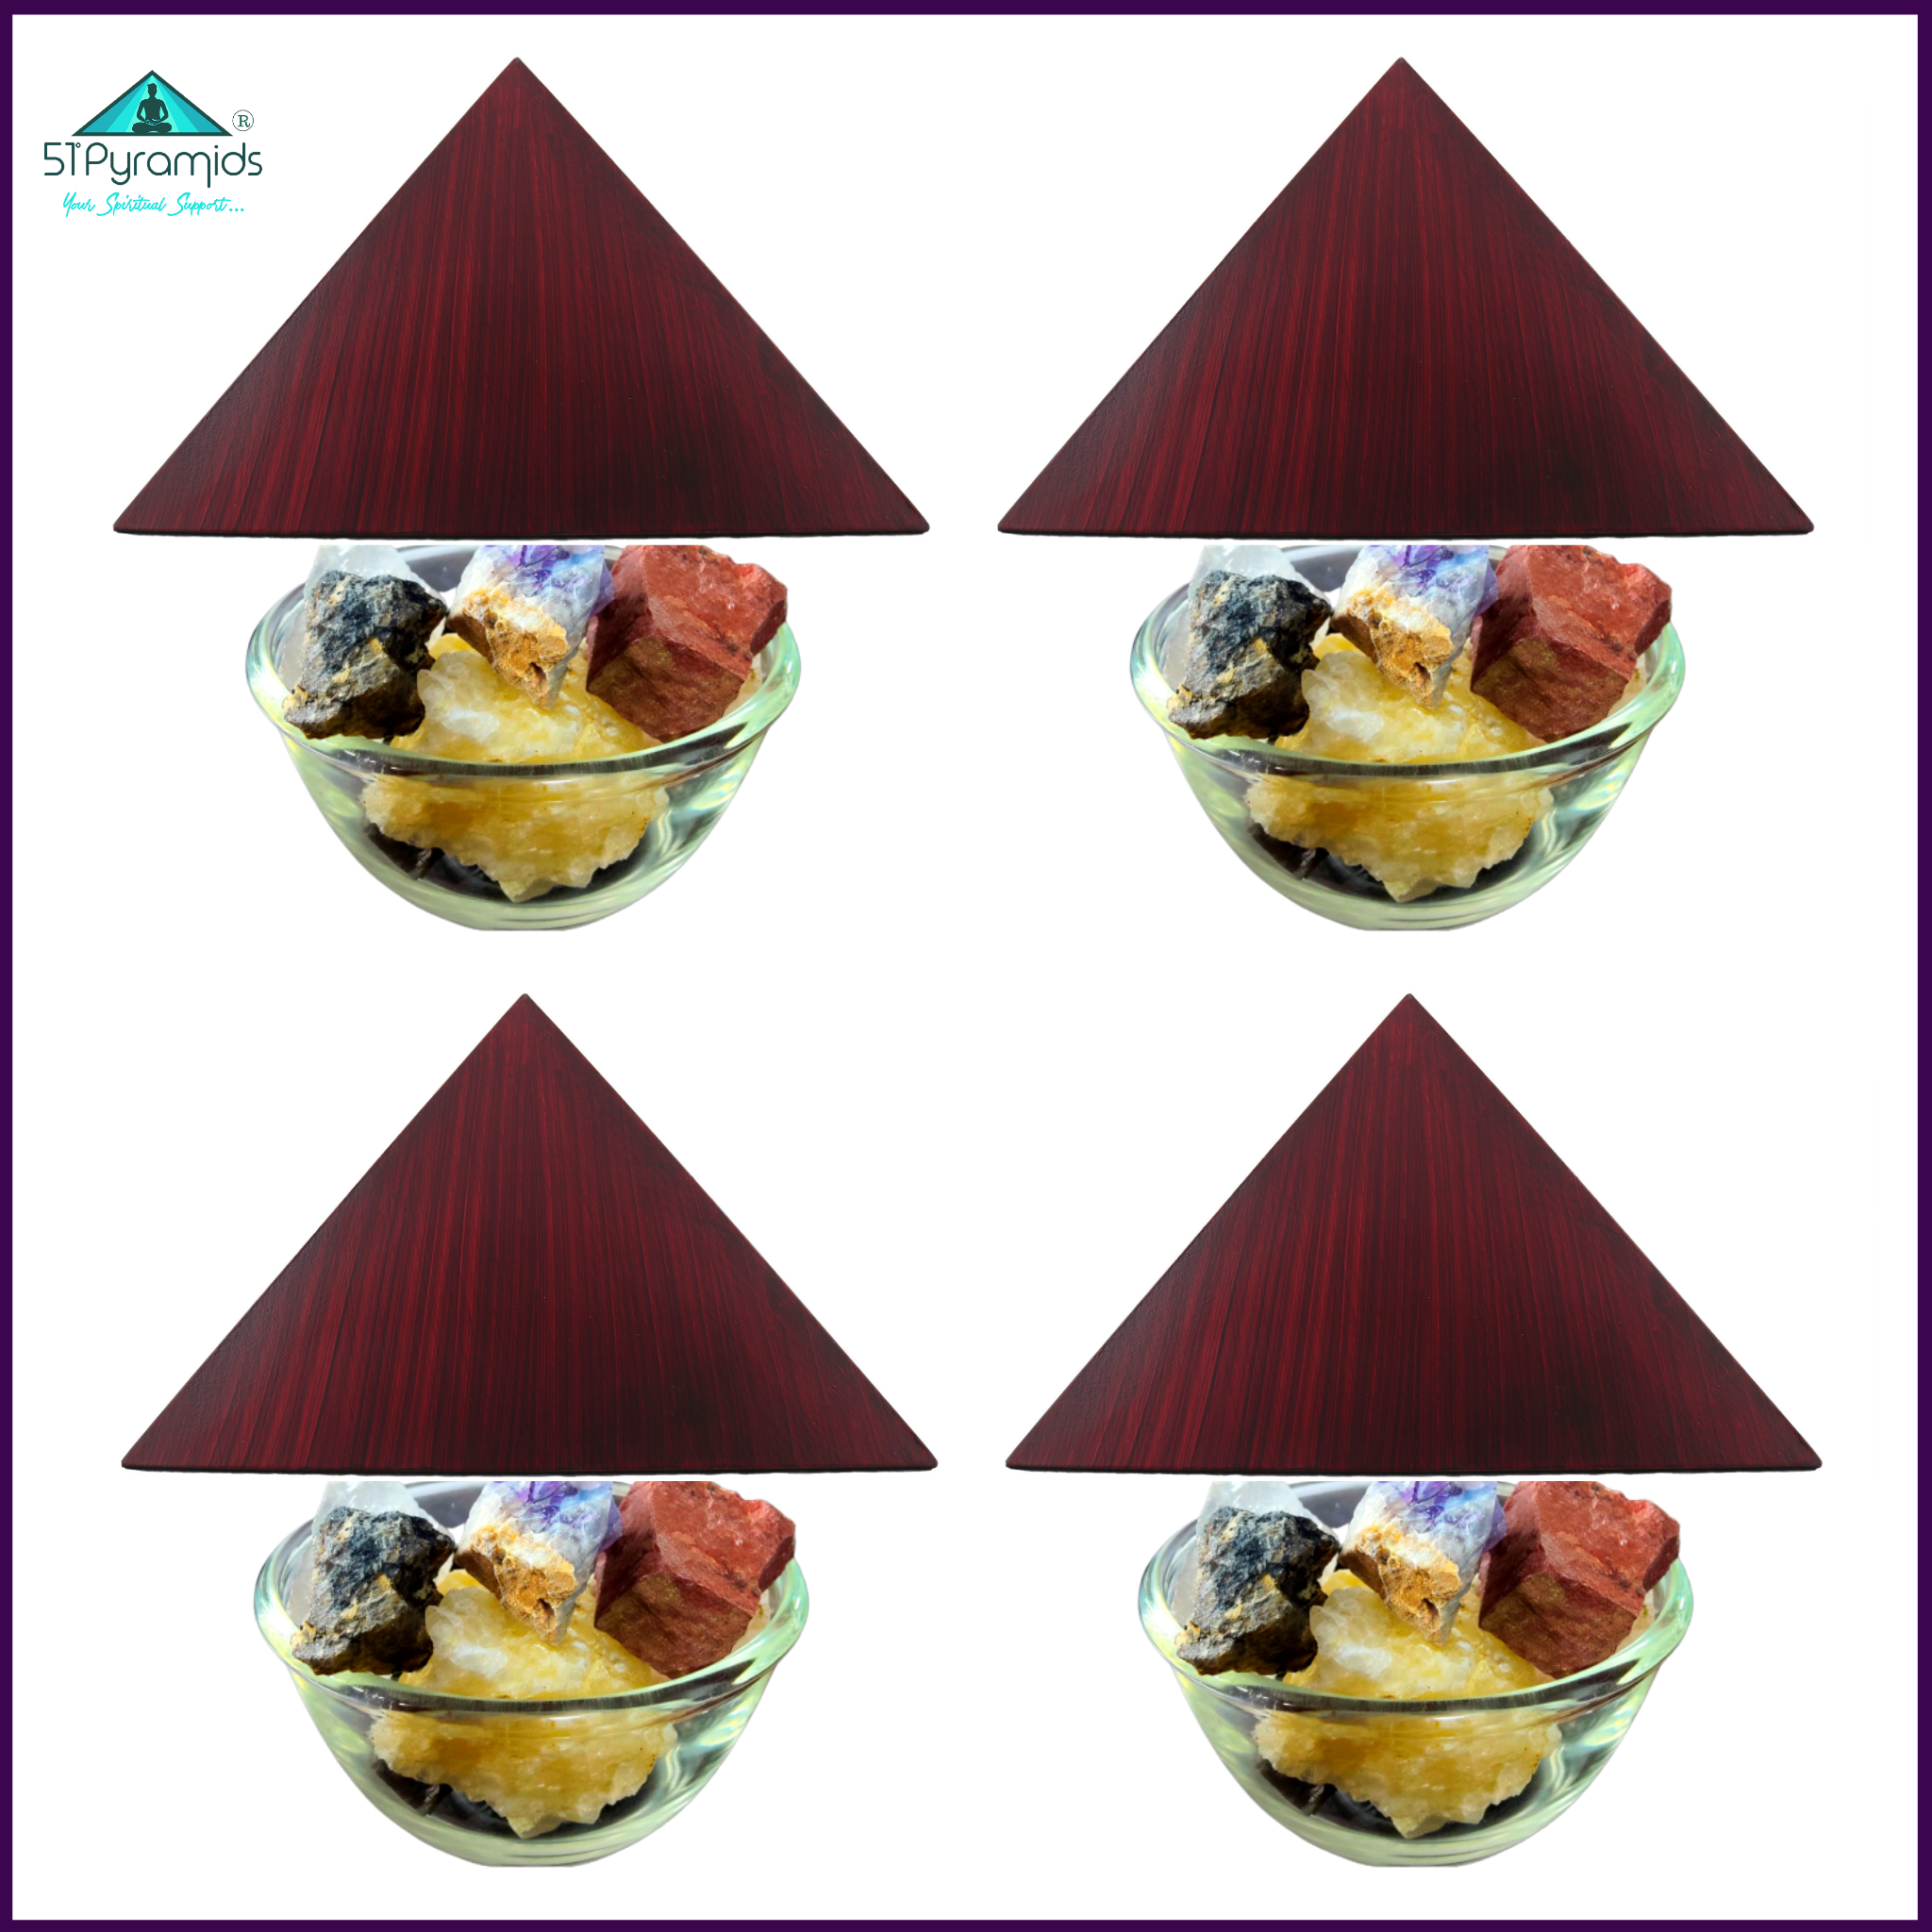 ENERGIZE YOUR HOME with 4 Corner Wood Pyramids (Rose Wood Painted) & 44 Natural Rough Stone Crystals - 51pyramids